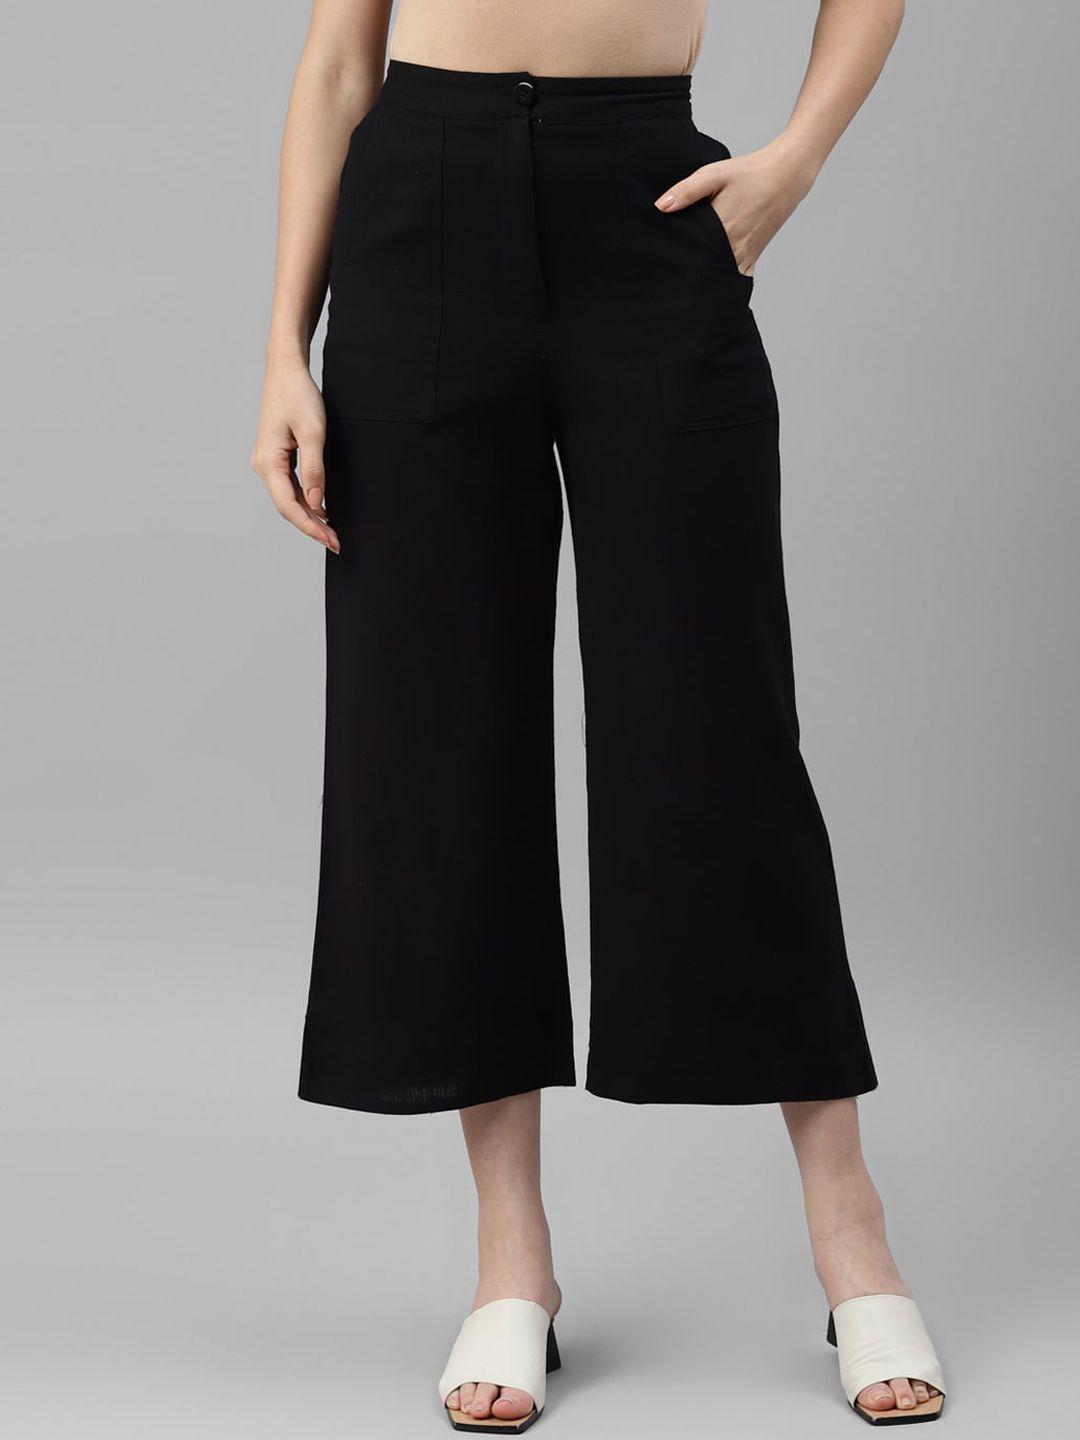 deebaco women black relaxed loose fit high-rise culottes trousers